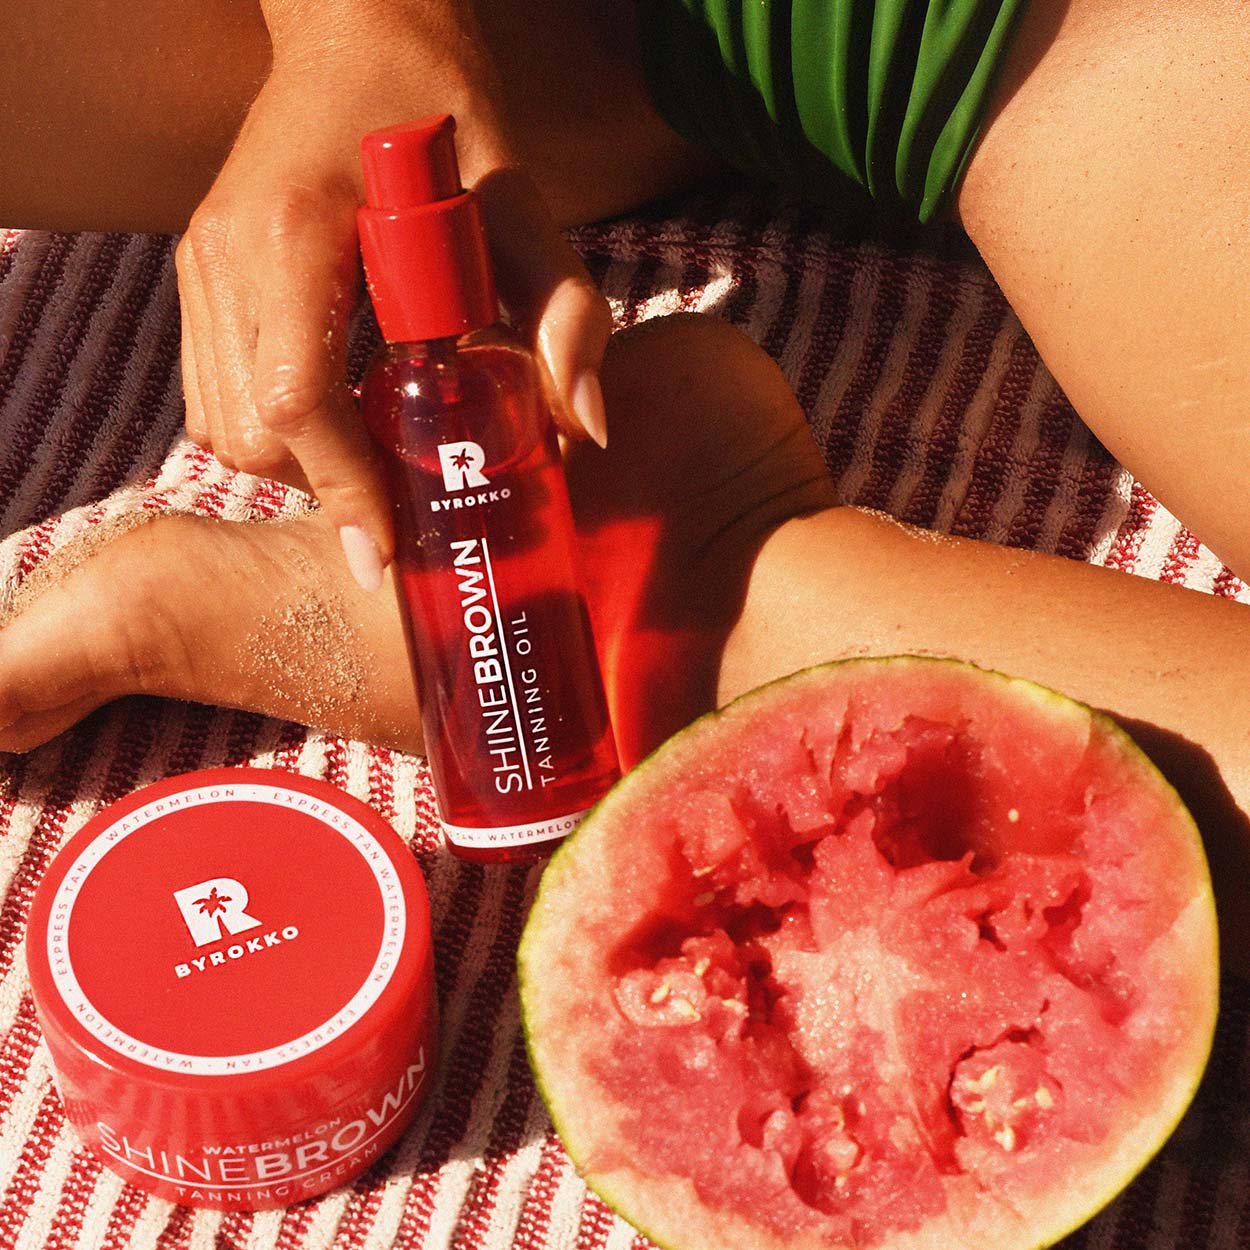 Watermelon Tanning Oil and Watermelon Tanning Cream beside a watermelon and a girl in a bikini.